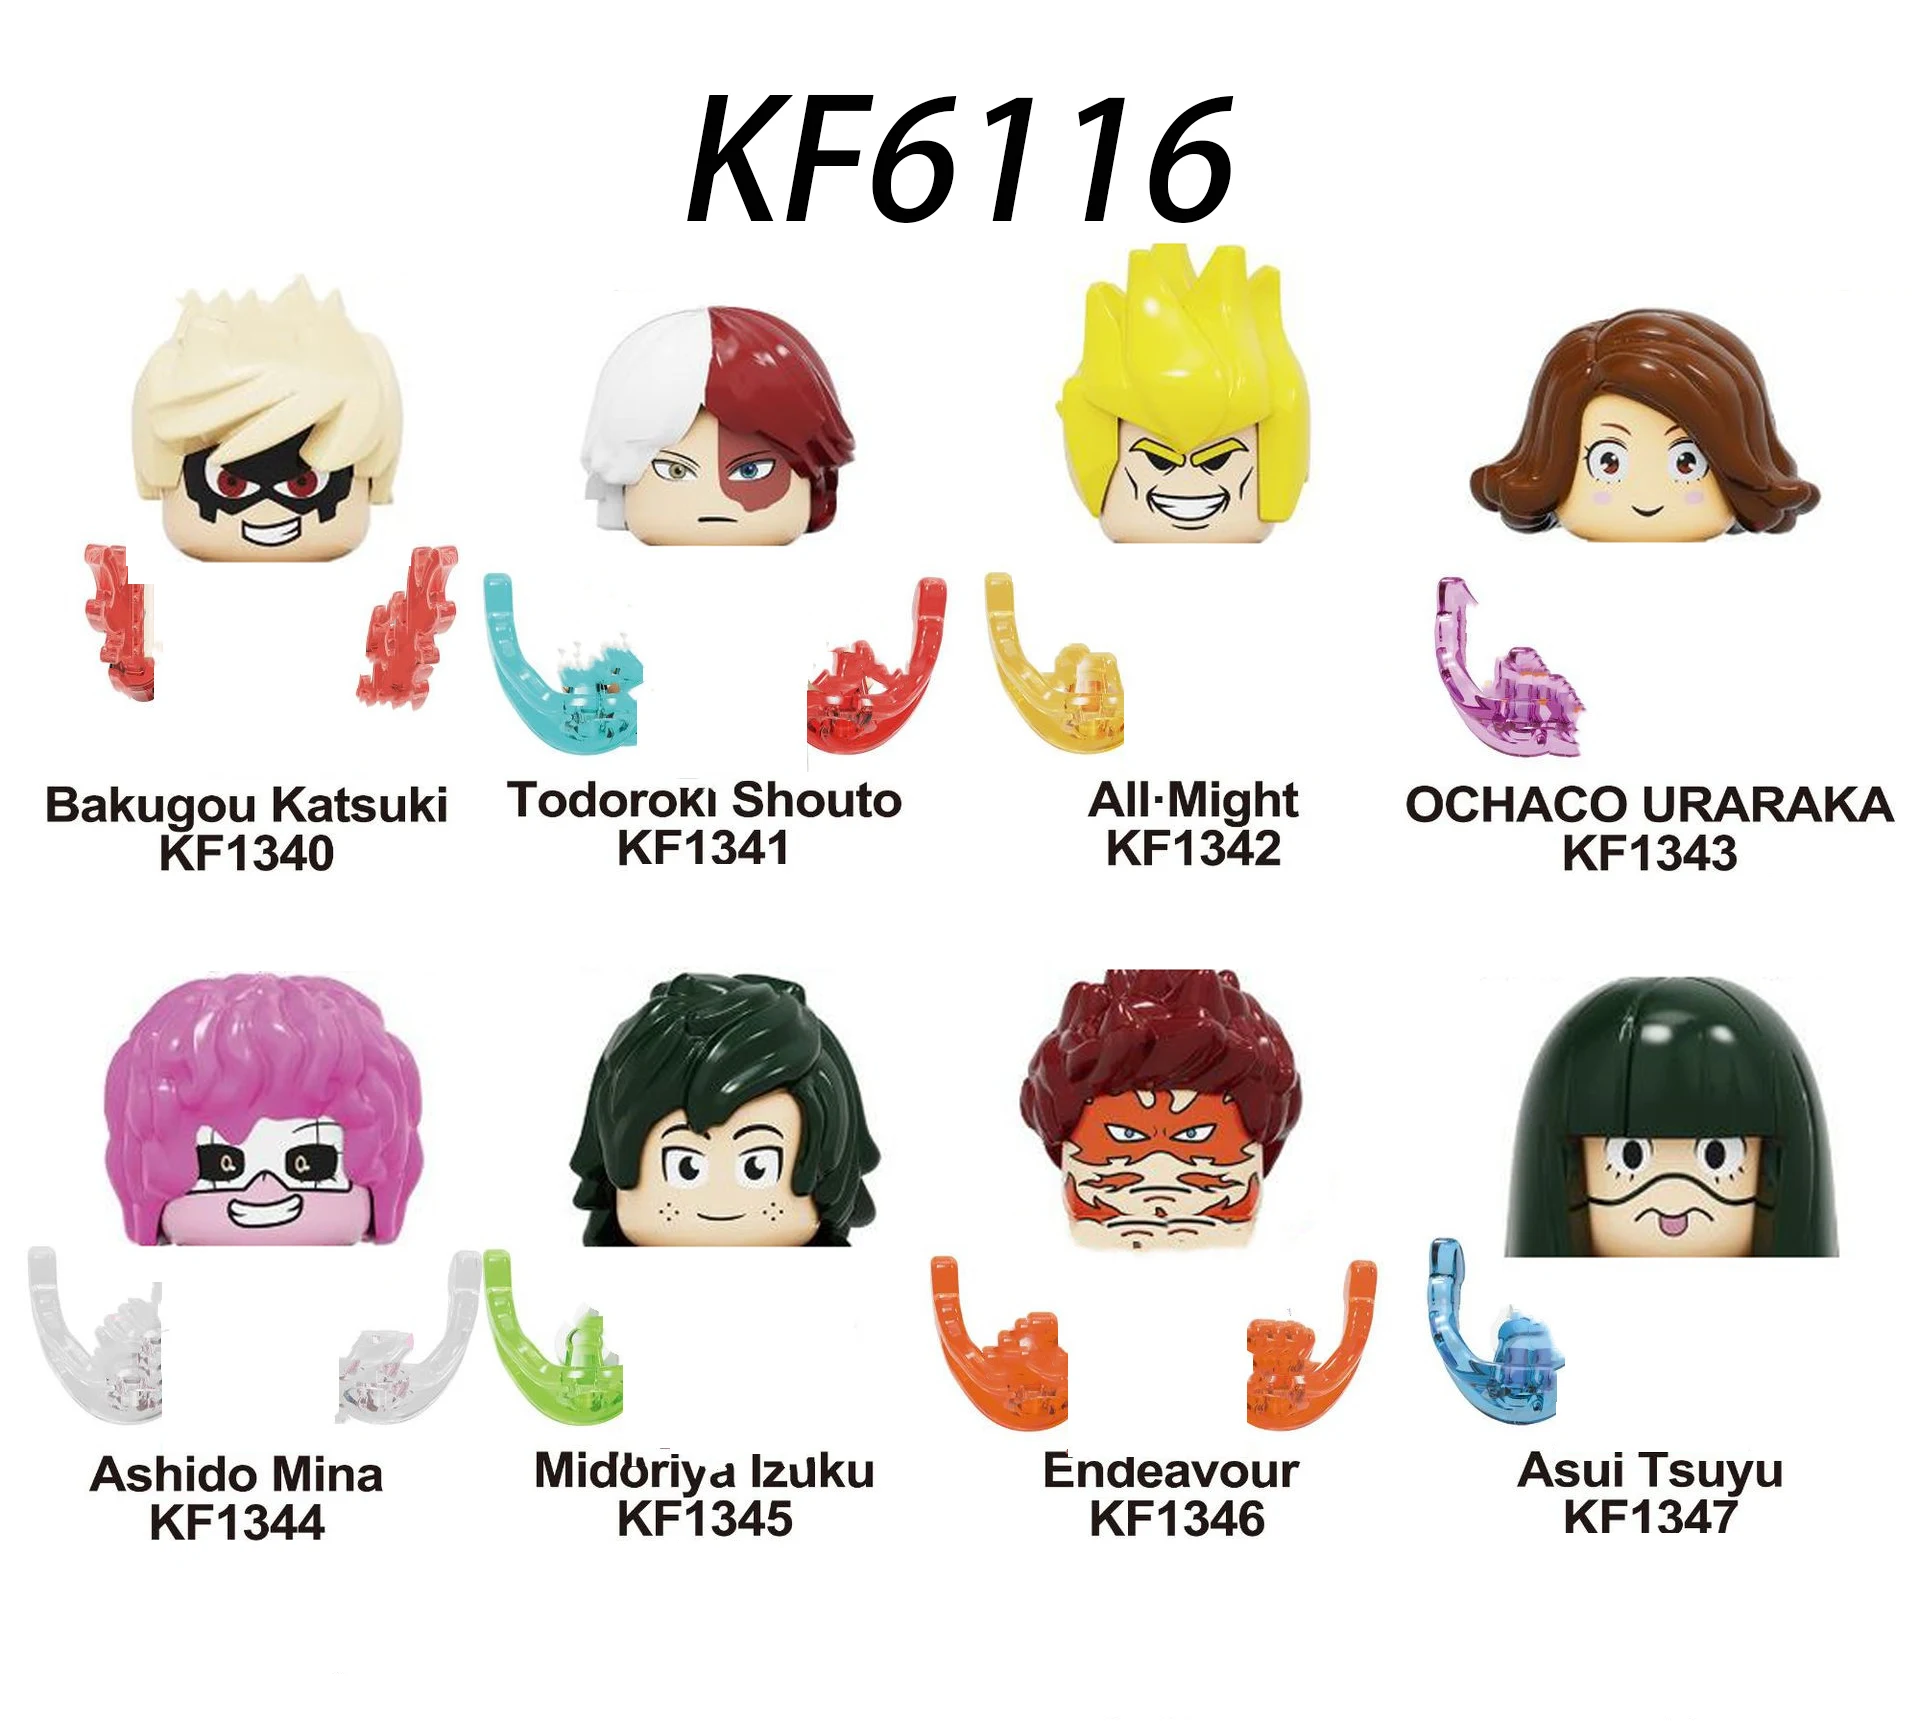 

Kf6116 Anime Action Character Buiding Blocks Toys for Kids My Hero Academia Series Compatible Anime Figures Children Girls Toys